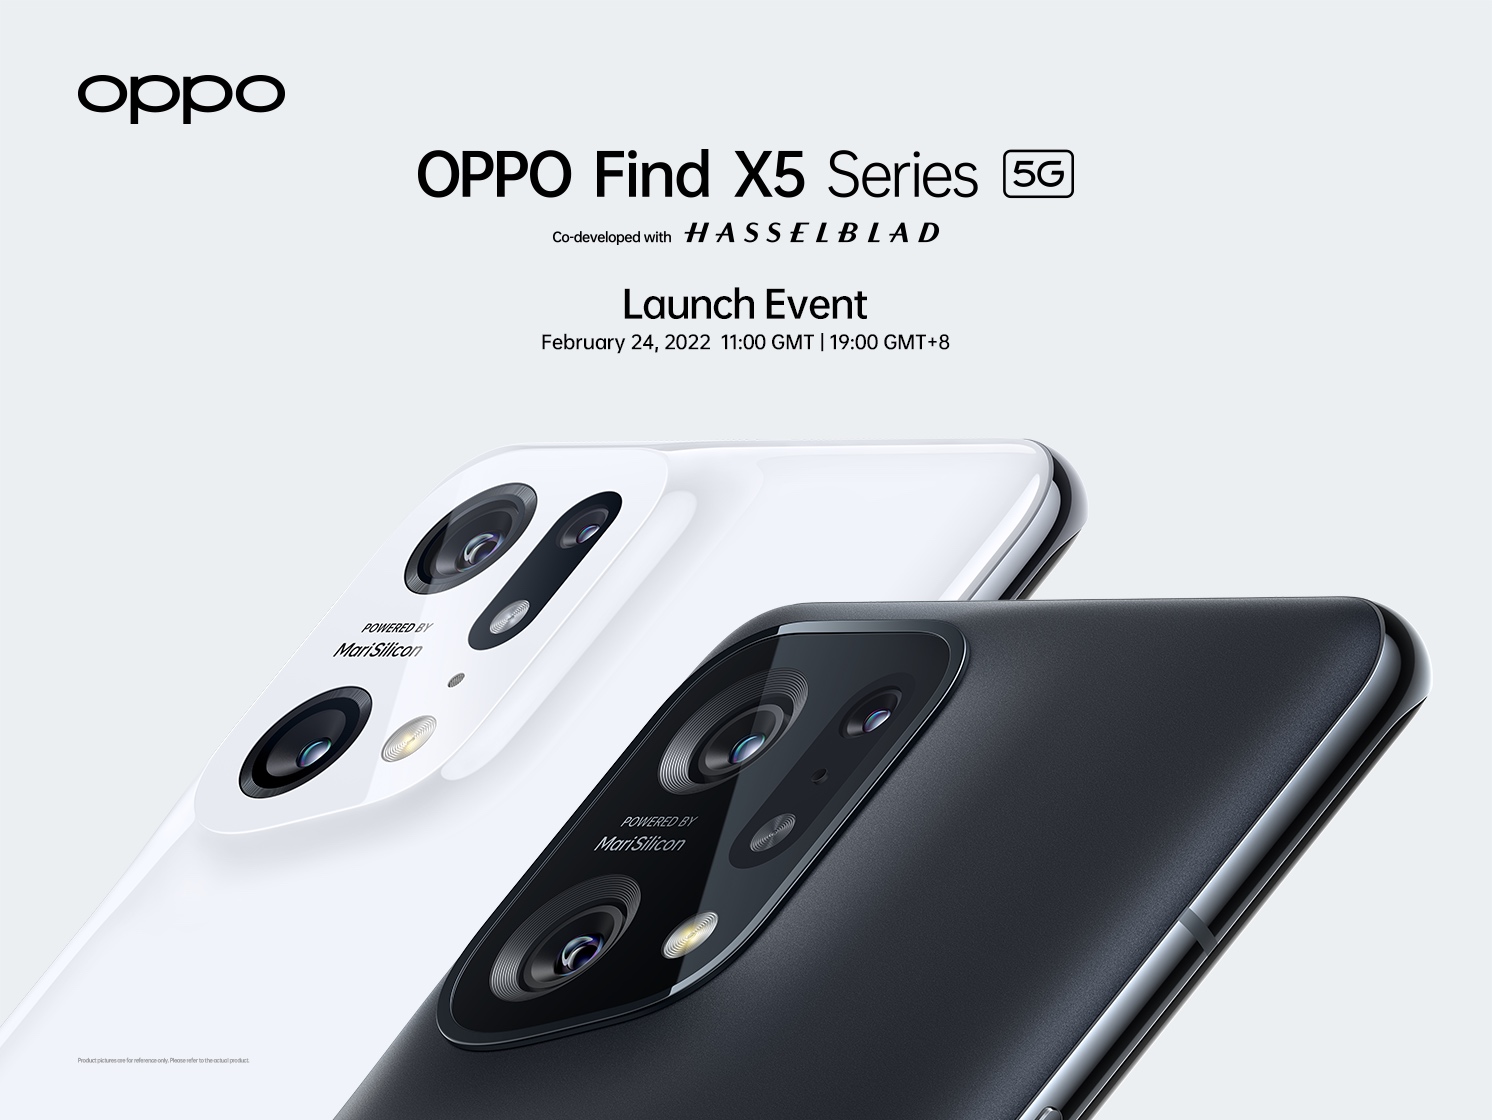 OPPO Launches Find X5 Series – The ultimate 5G flagships designed to  capture the night